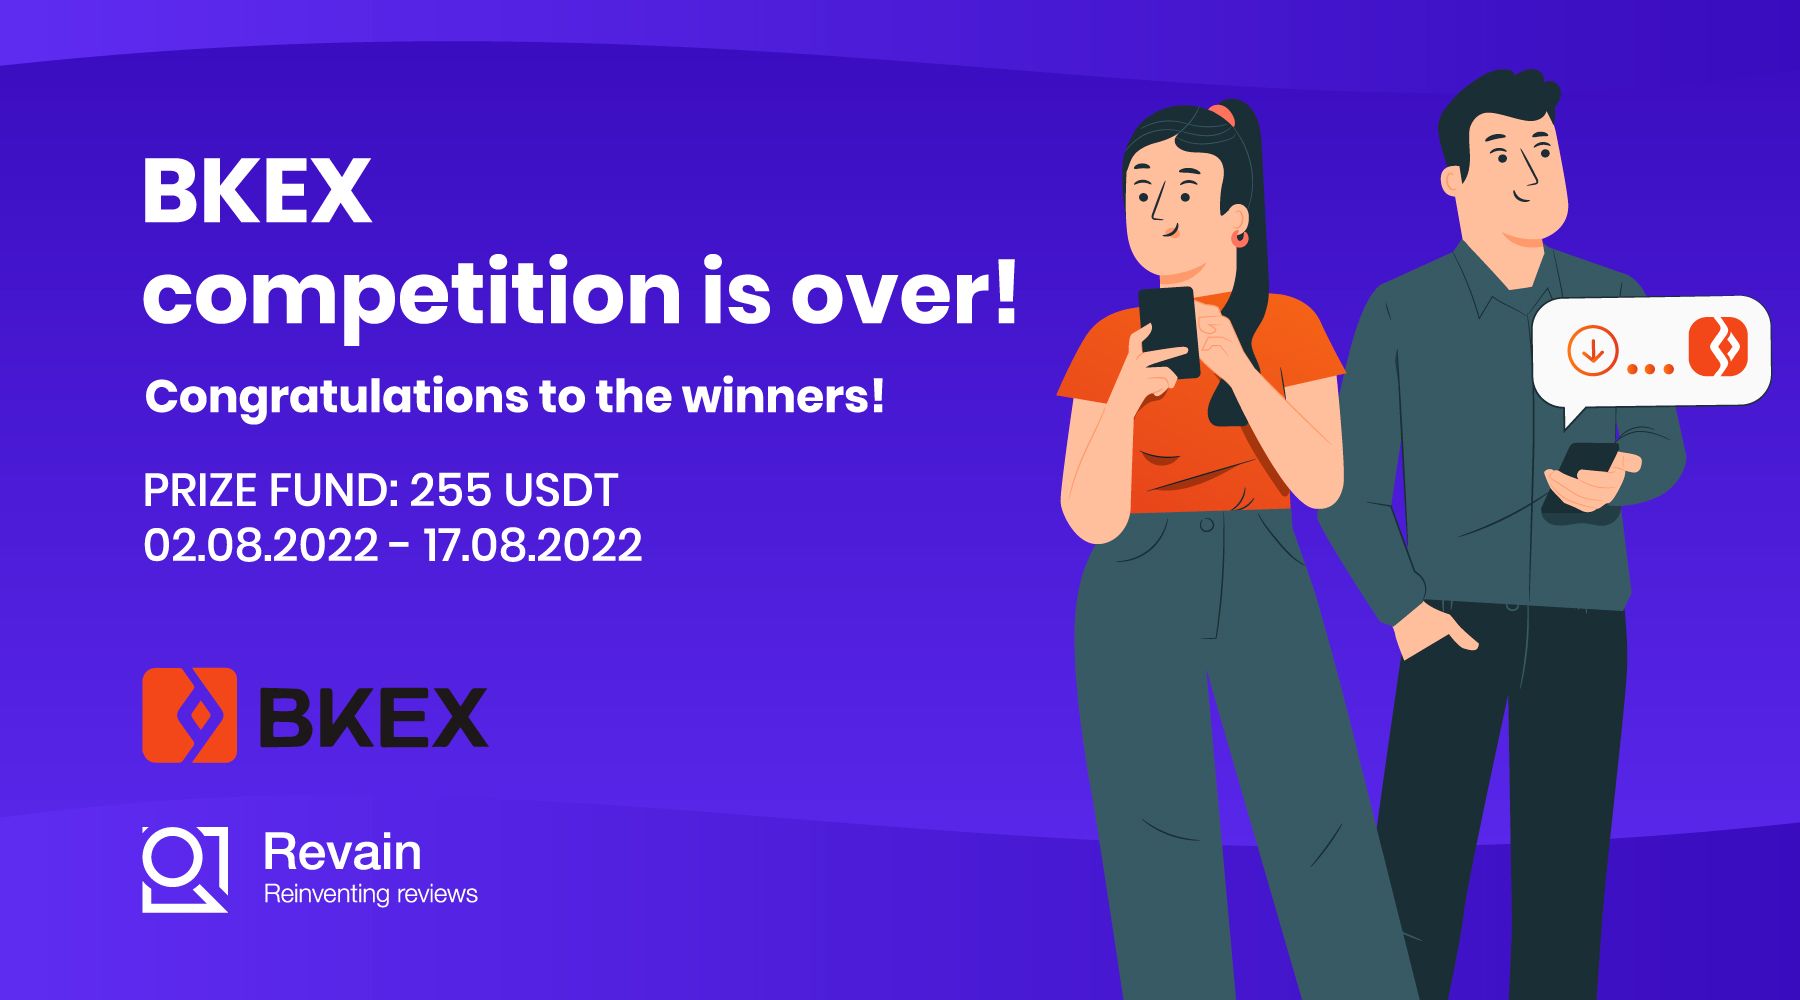 BKEX competition is over!